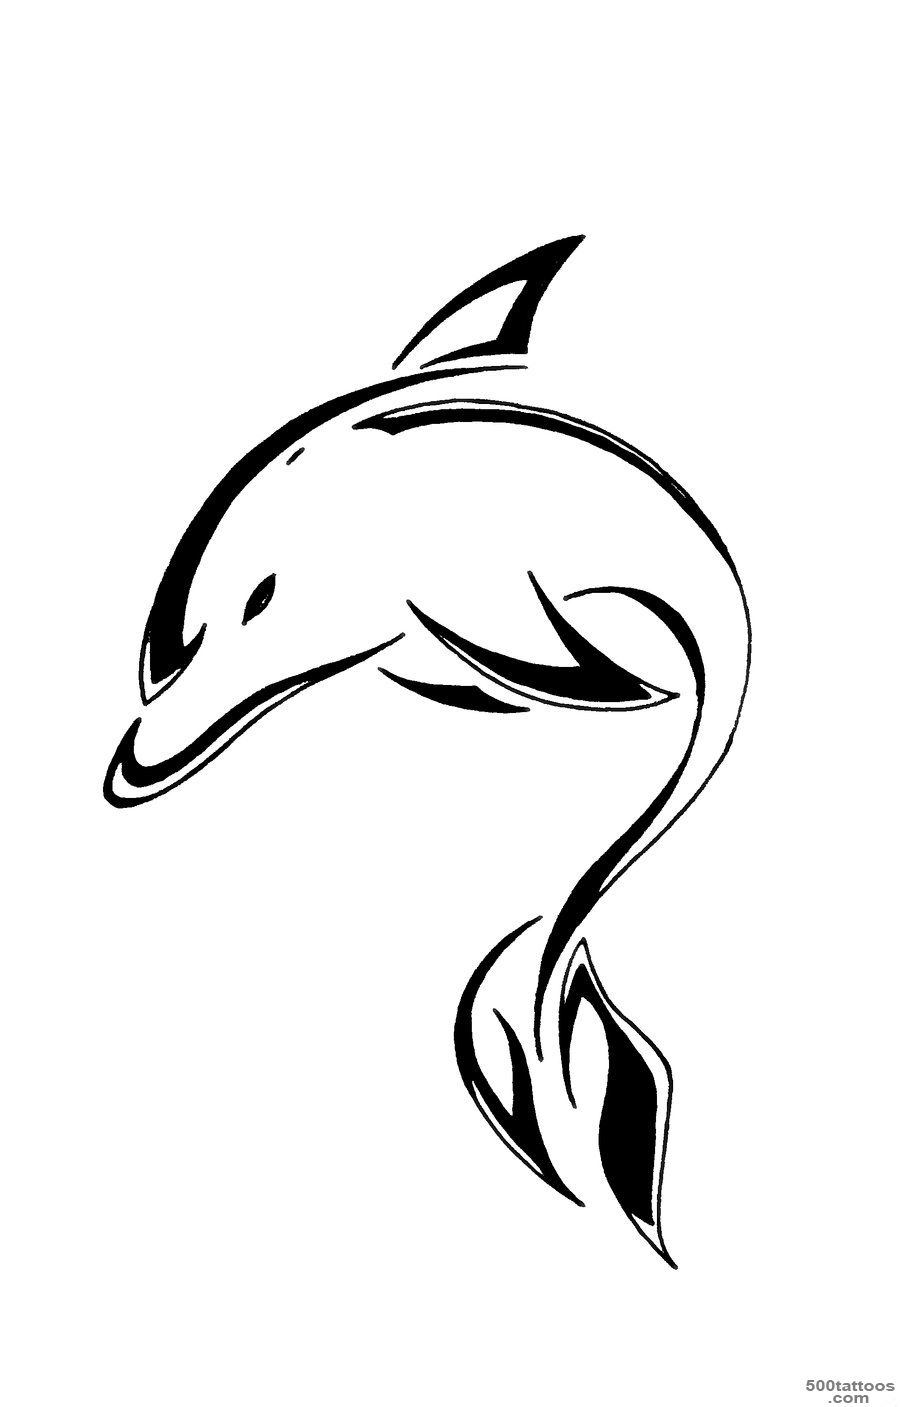 35+ Awesome Dolphin Tattoo Designs_13